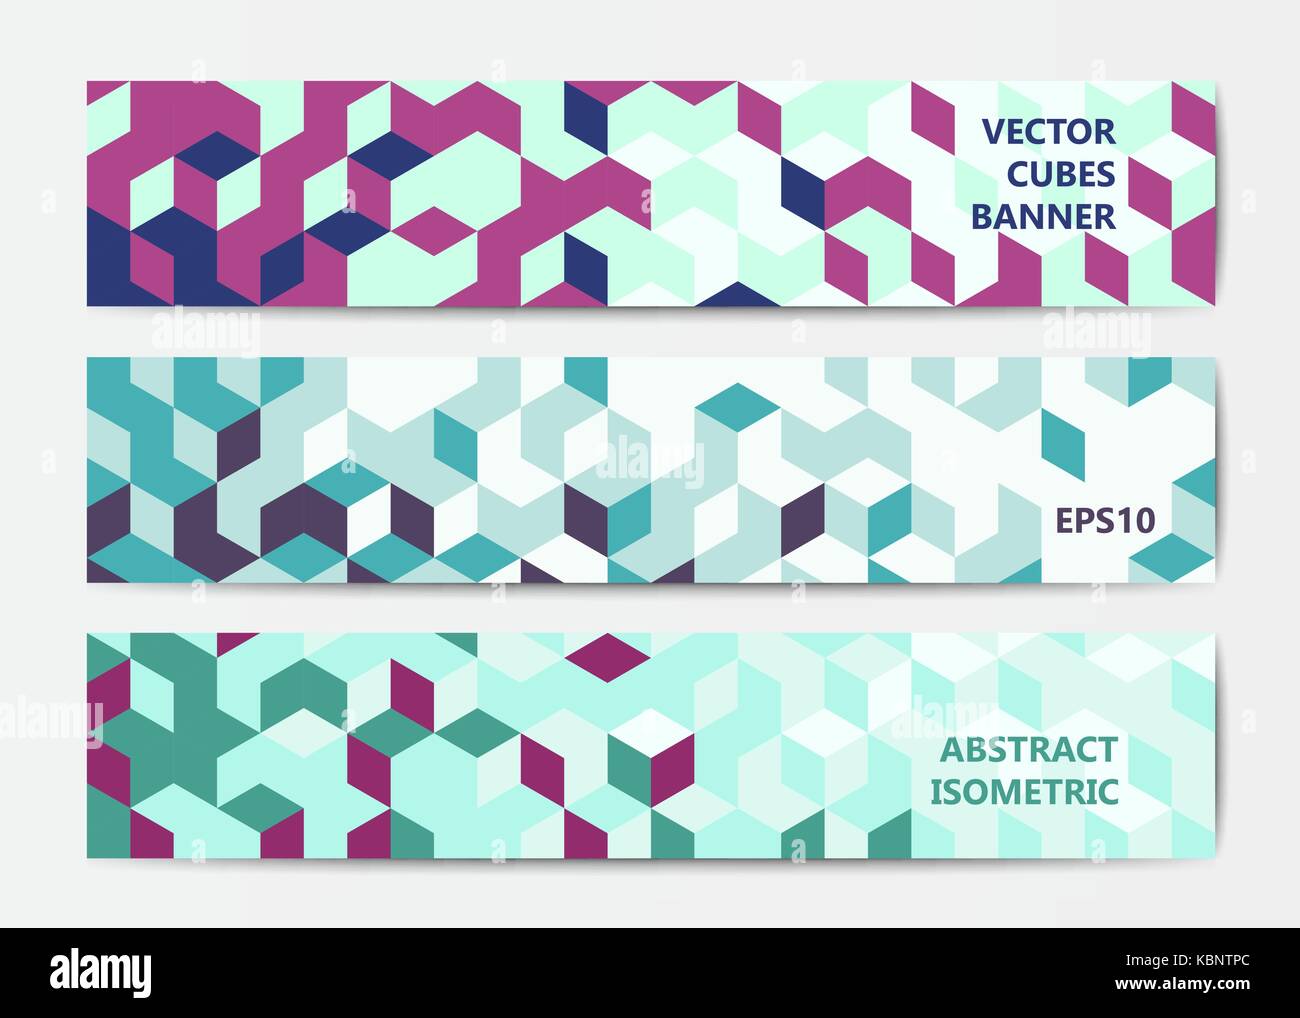 Abstract geometric banner templates Stock Vector